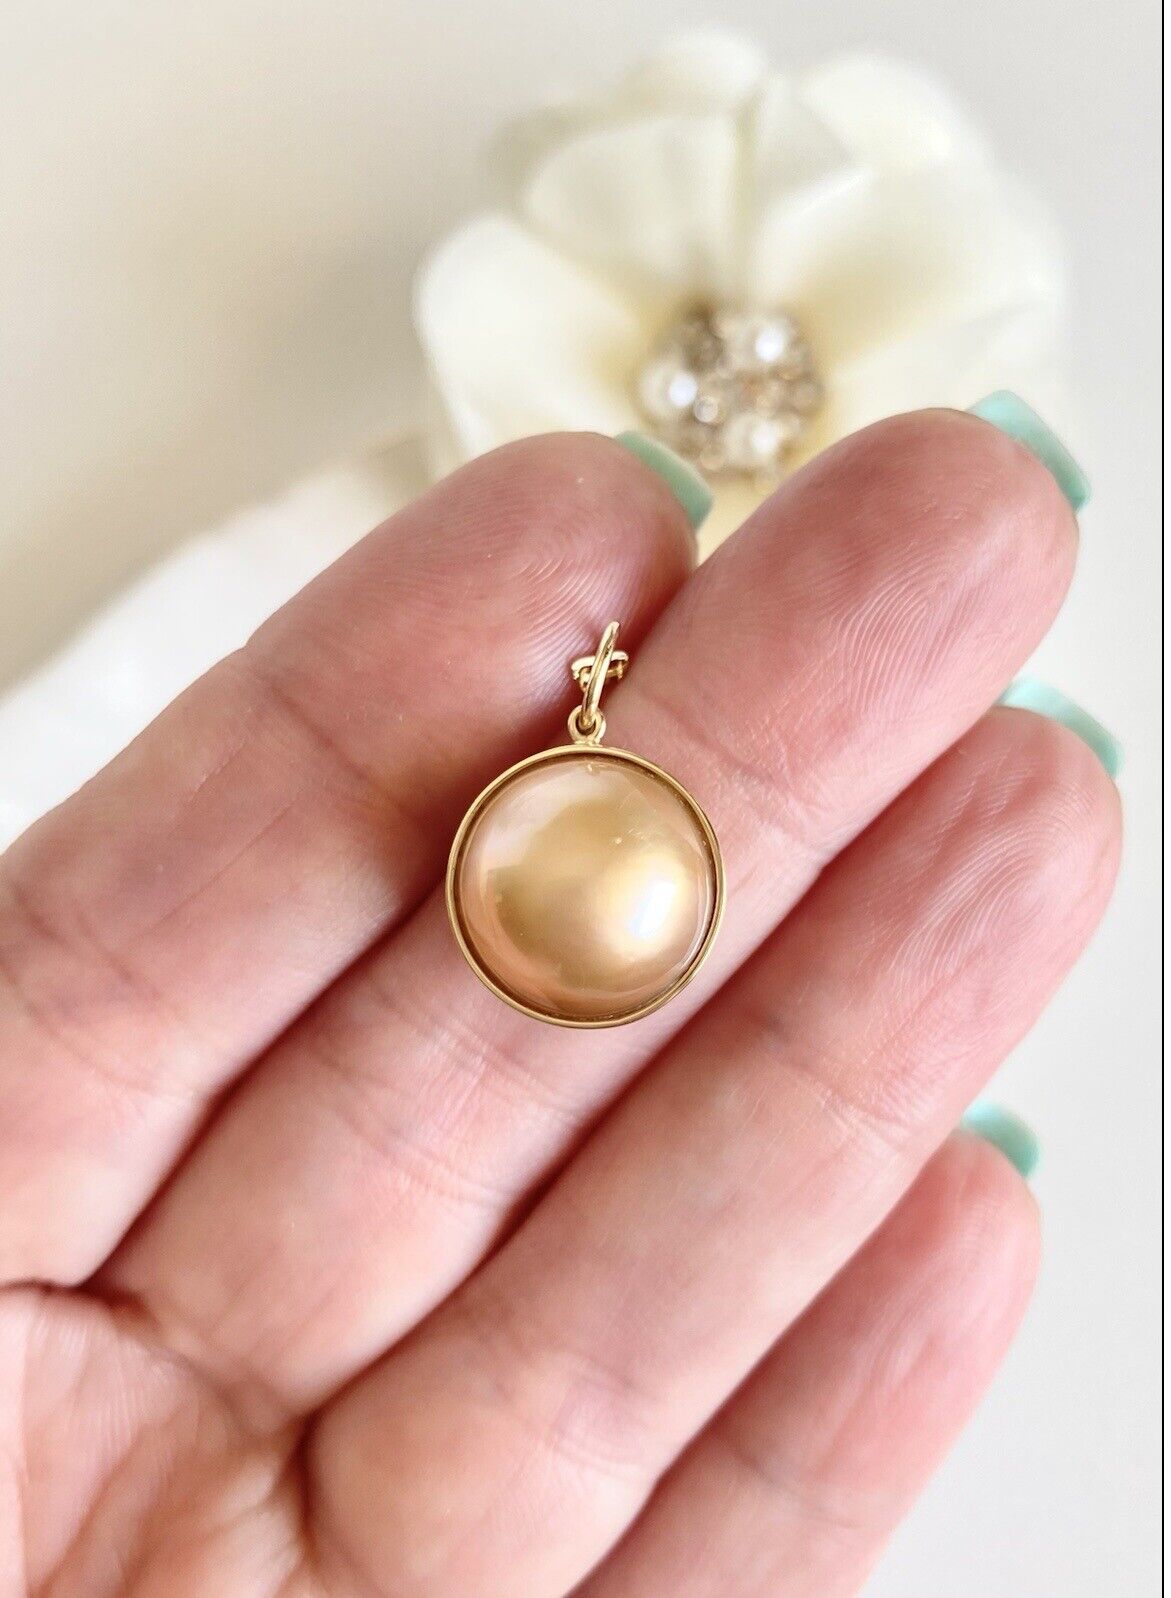 Genuine Gold Mabe Pearl (13mm) Solid 14K Yellow Gold Pendant, New